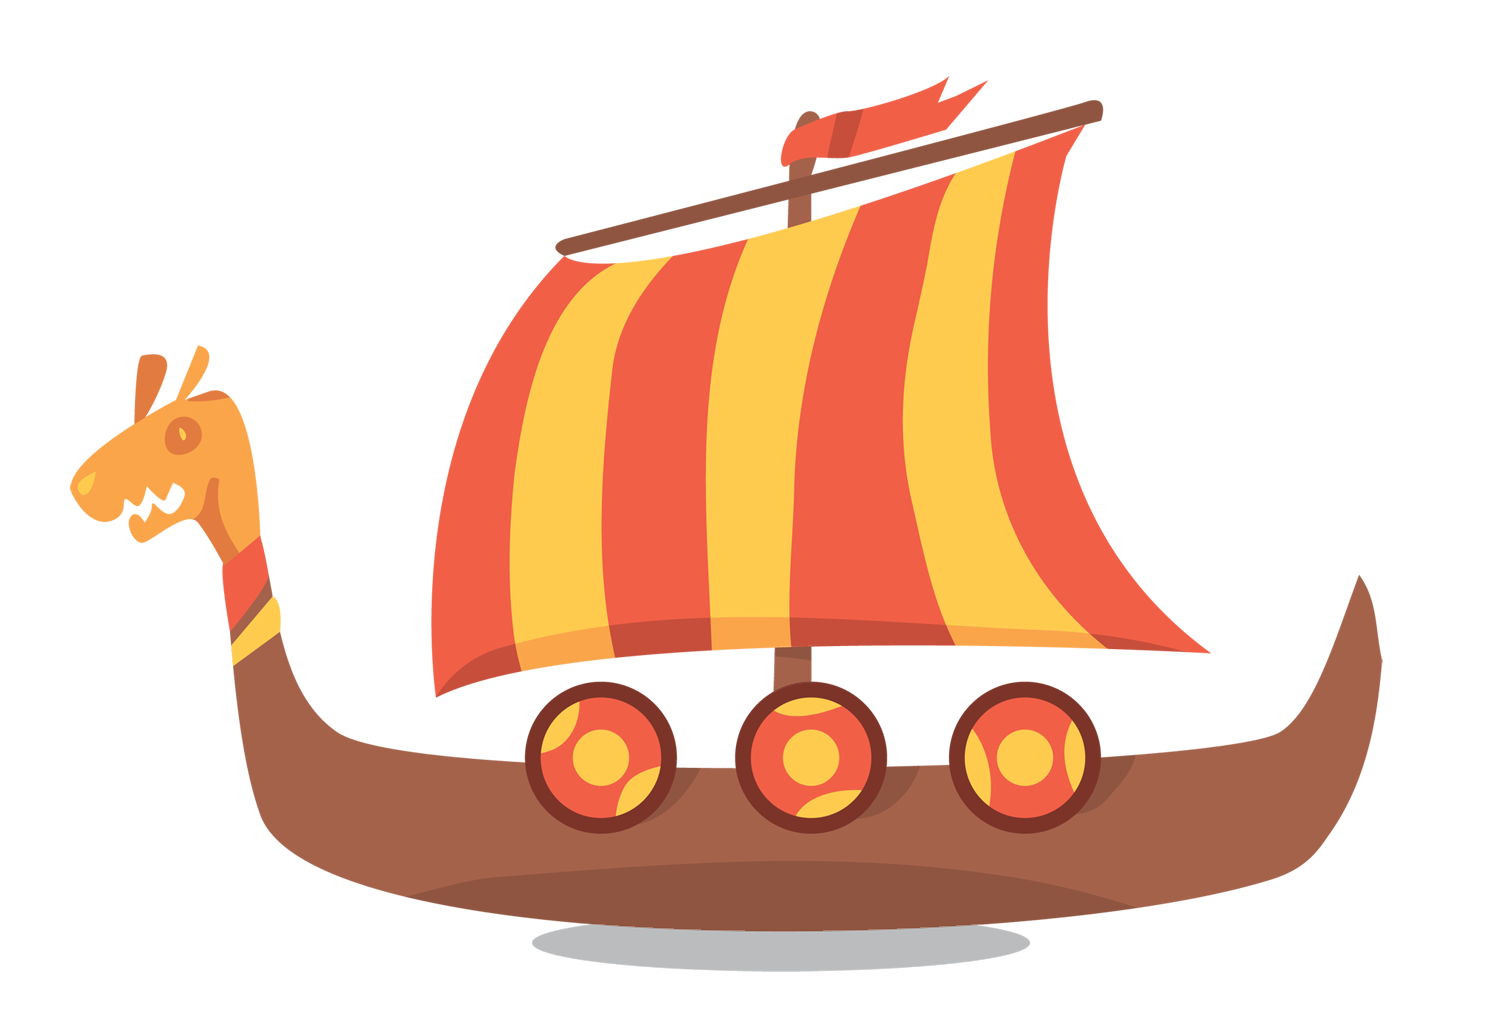 clipart boat boat tour